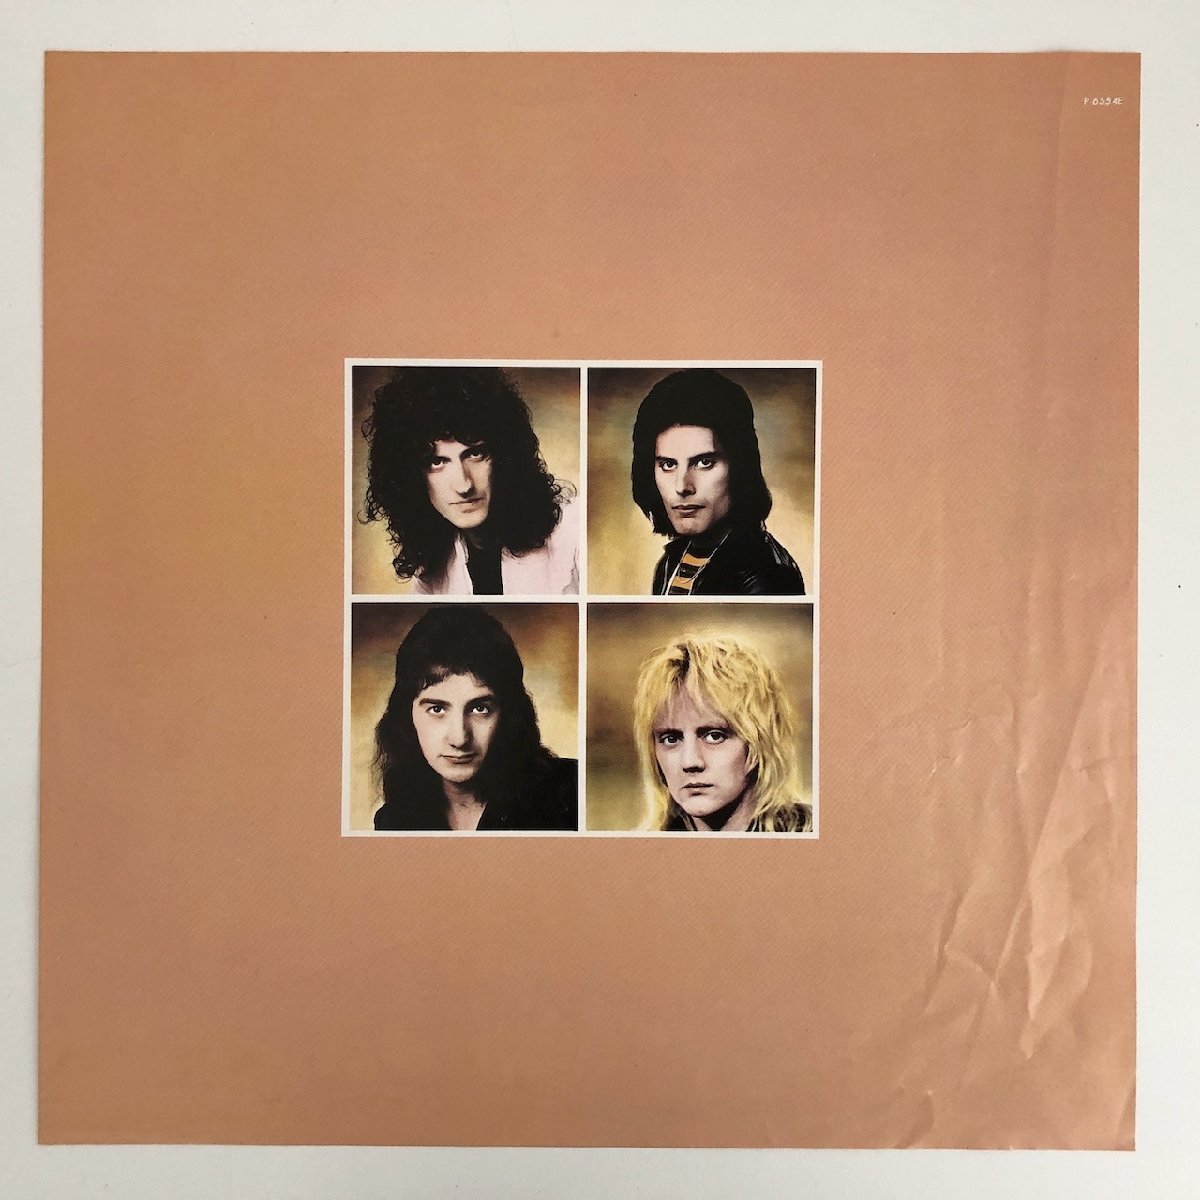 LP/ QUEEN / A DAY AT THE RACES / 国内盤 帯・ライナー ELECTRA P-6554E 403011_画像5